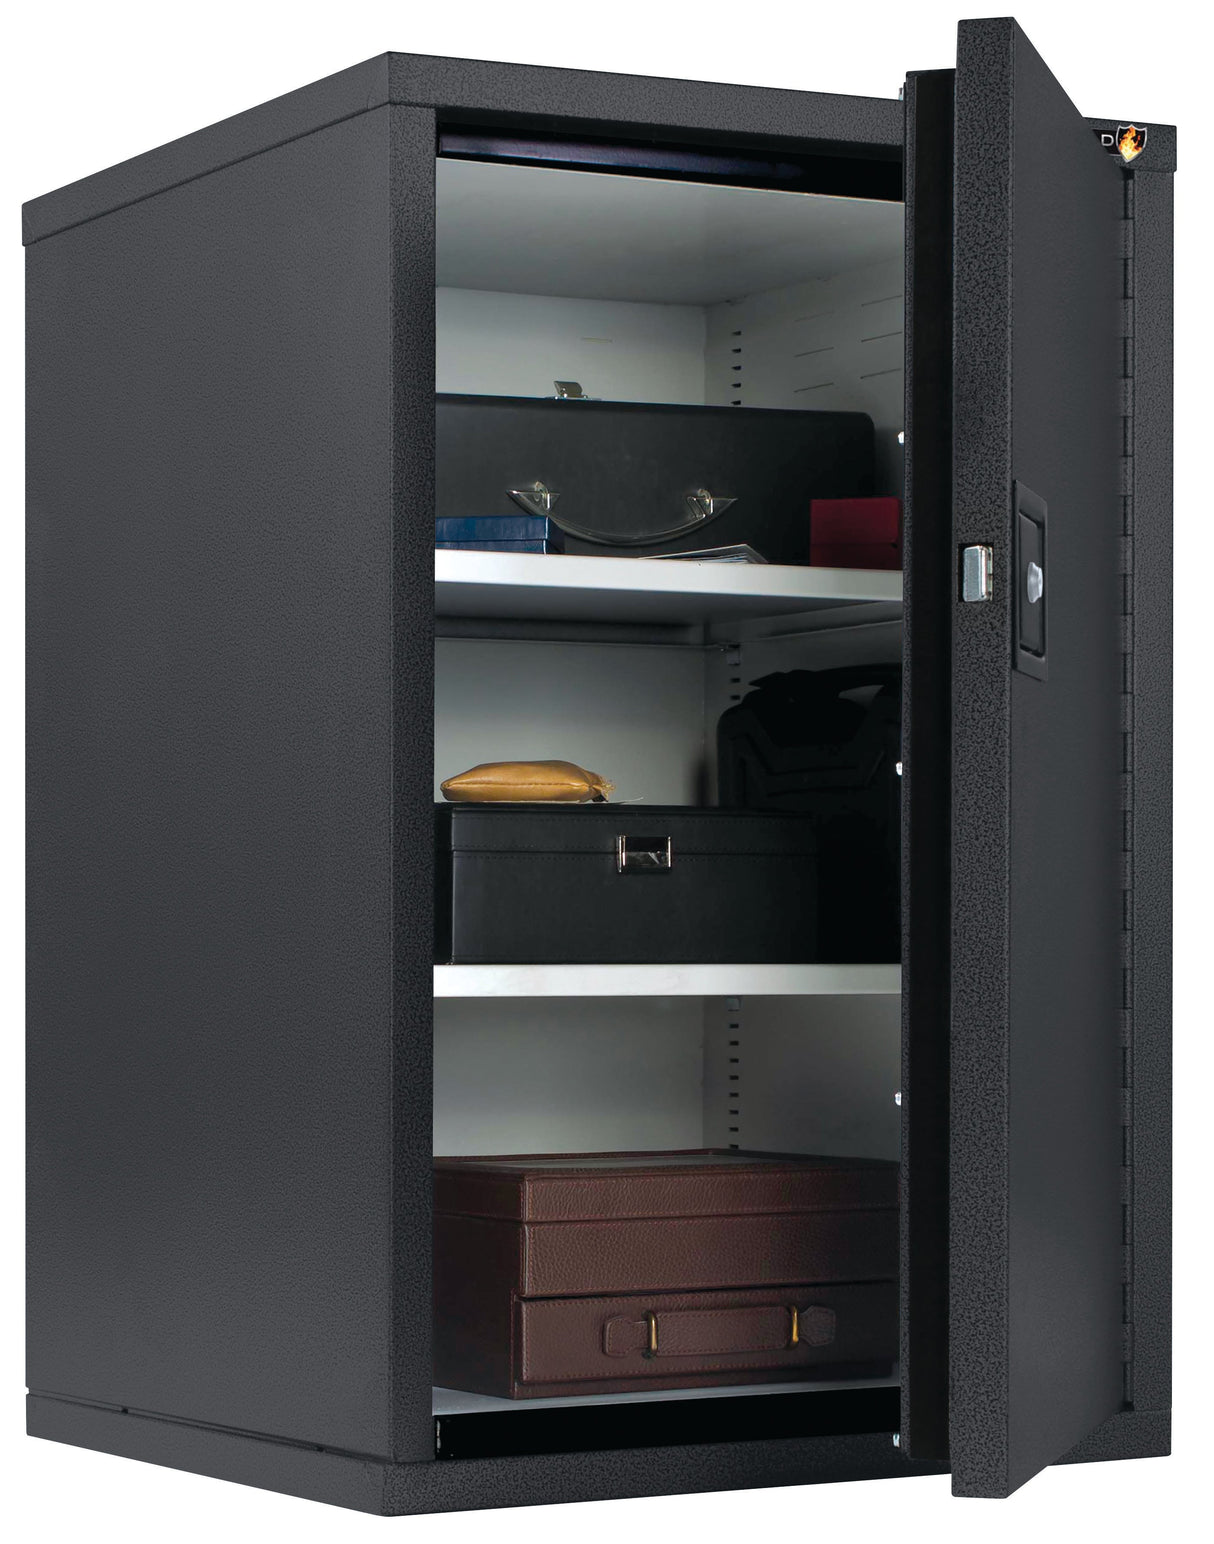 FireKing FireShield HSC-3422 Storage Cabinet with 2 Adjustable Shelves - 1-Hour Fire Rating